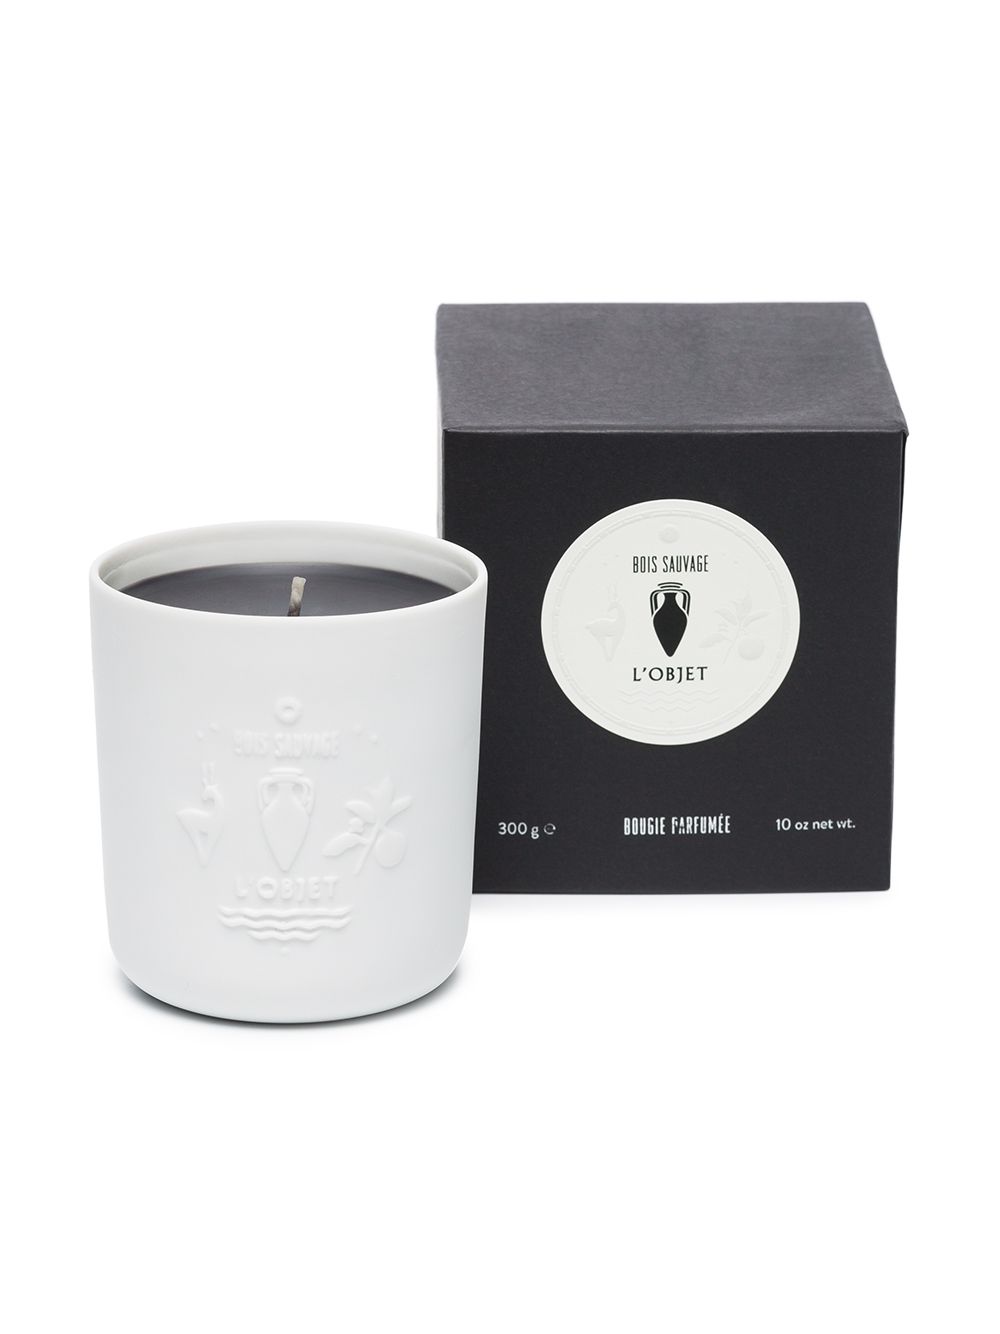 Image 2 of L'Objet Bois Sauvage candle (300g)